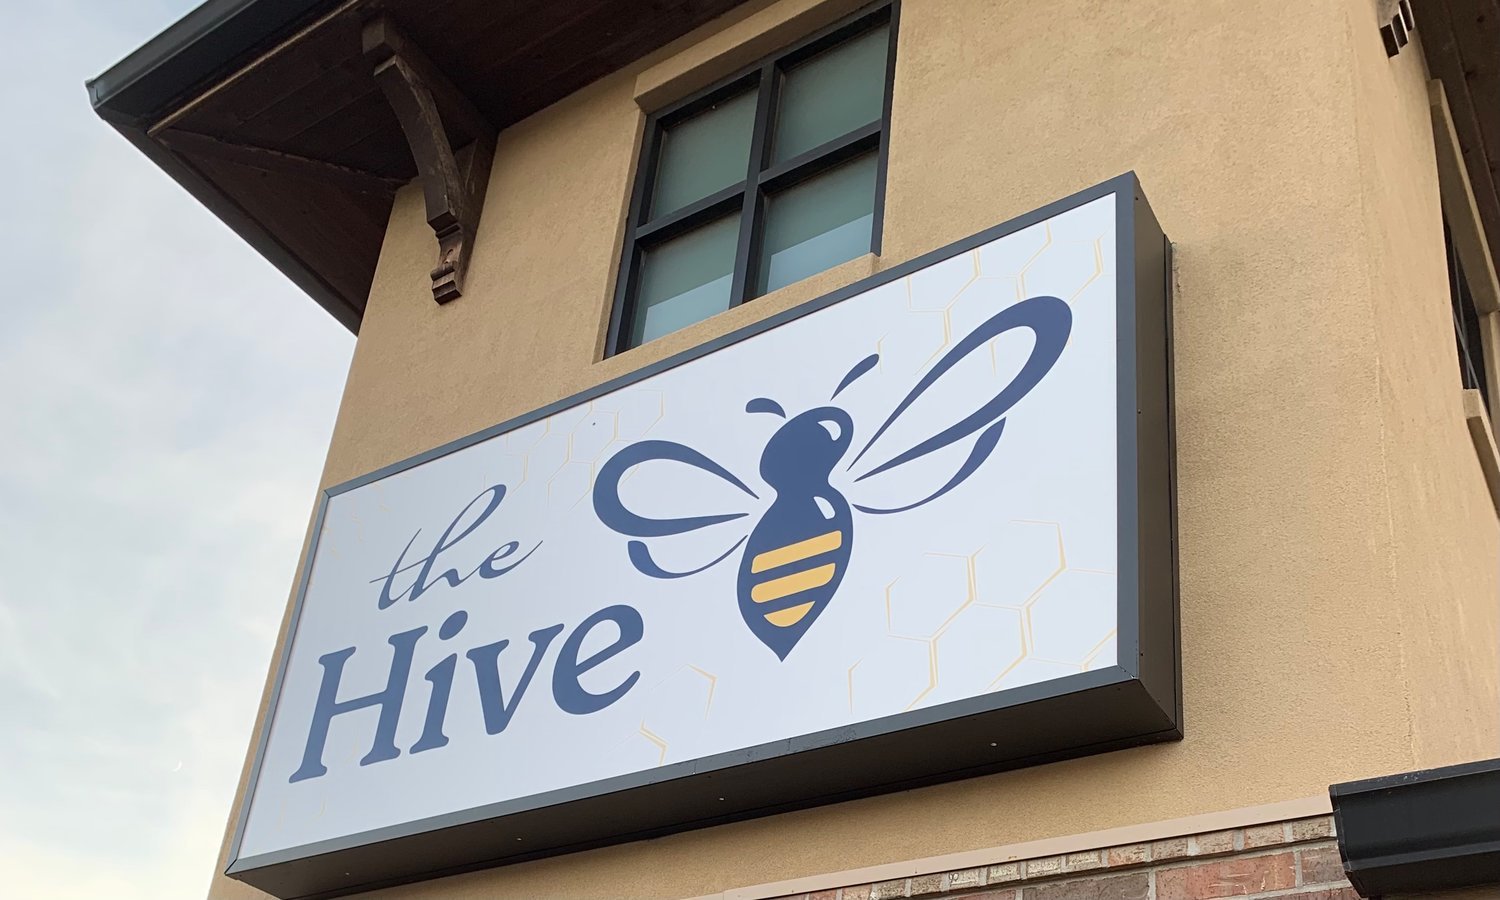 The Hive is an award-winning cafe that employs people with developmental disabilities in Willard.